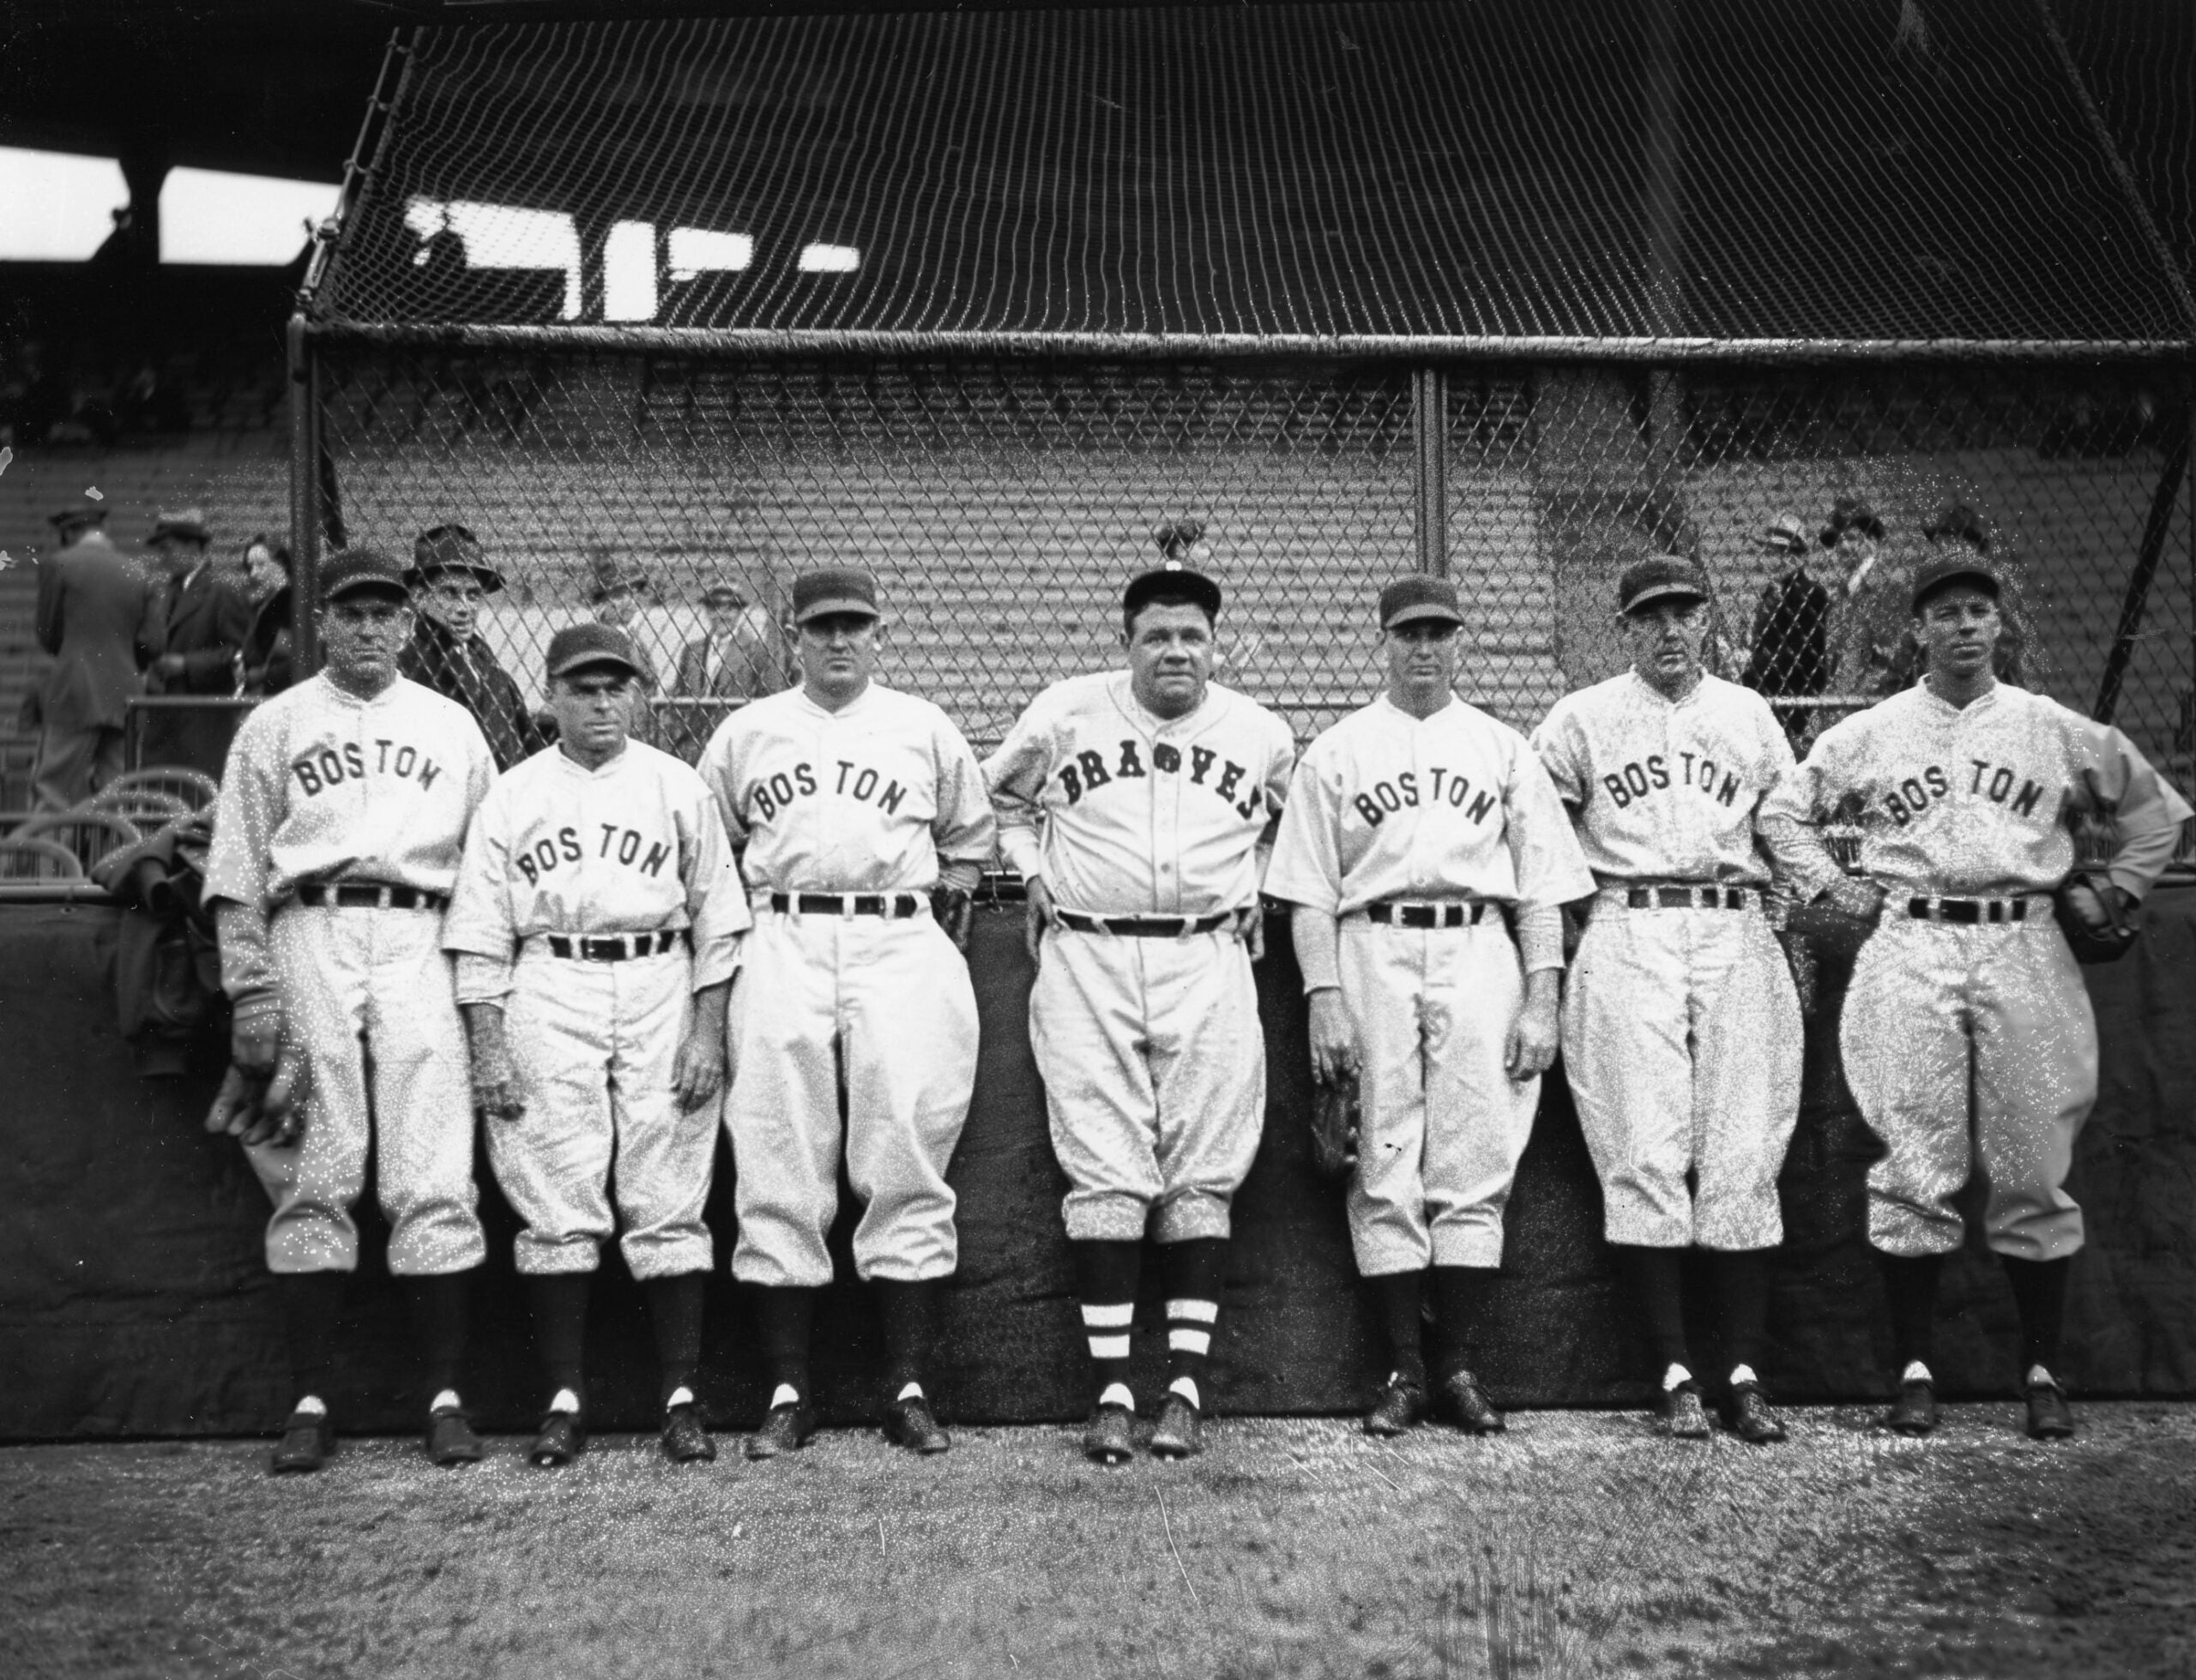 babe ruth's uniform number